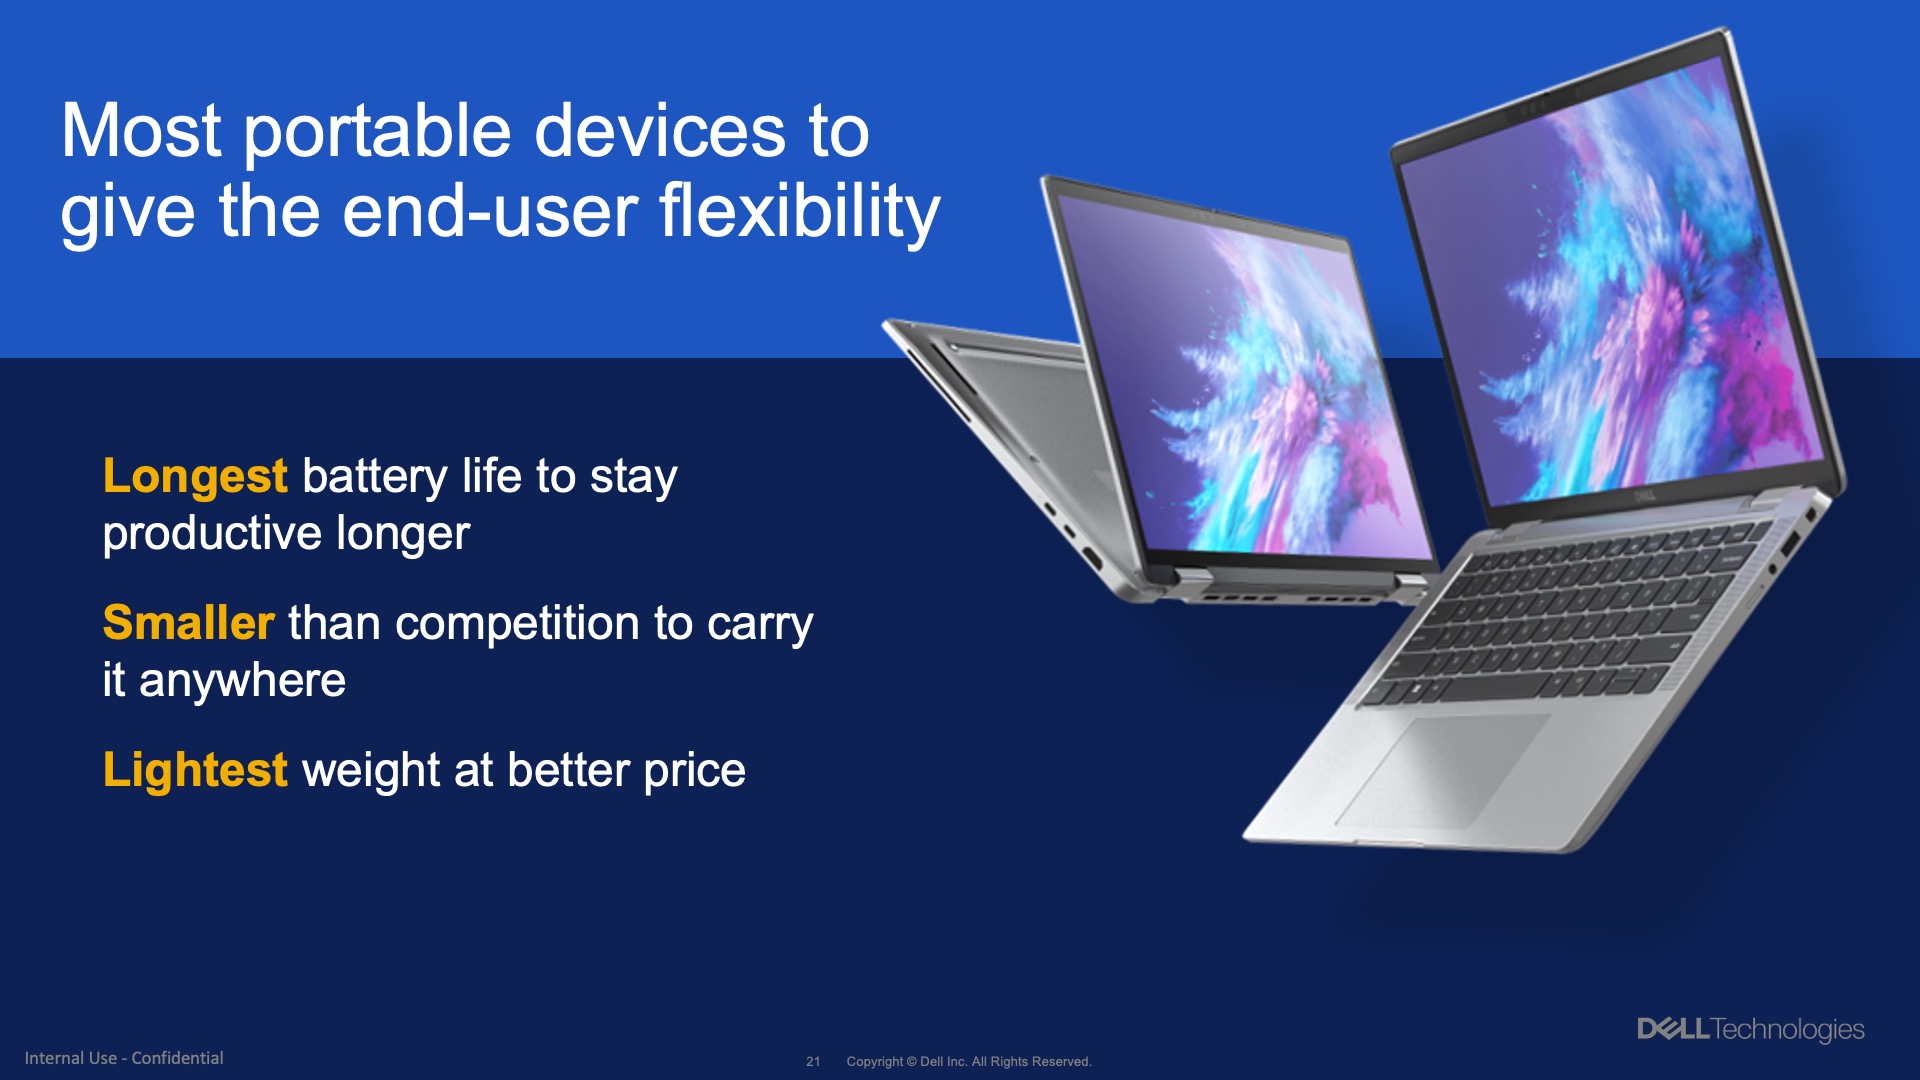 A slide from the PC-as-a-Service presentation. There are two Dell laptops and slide text